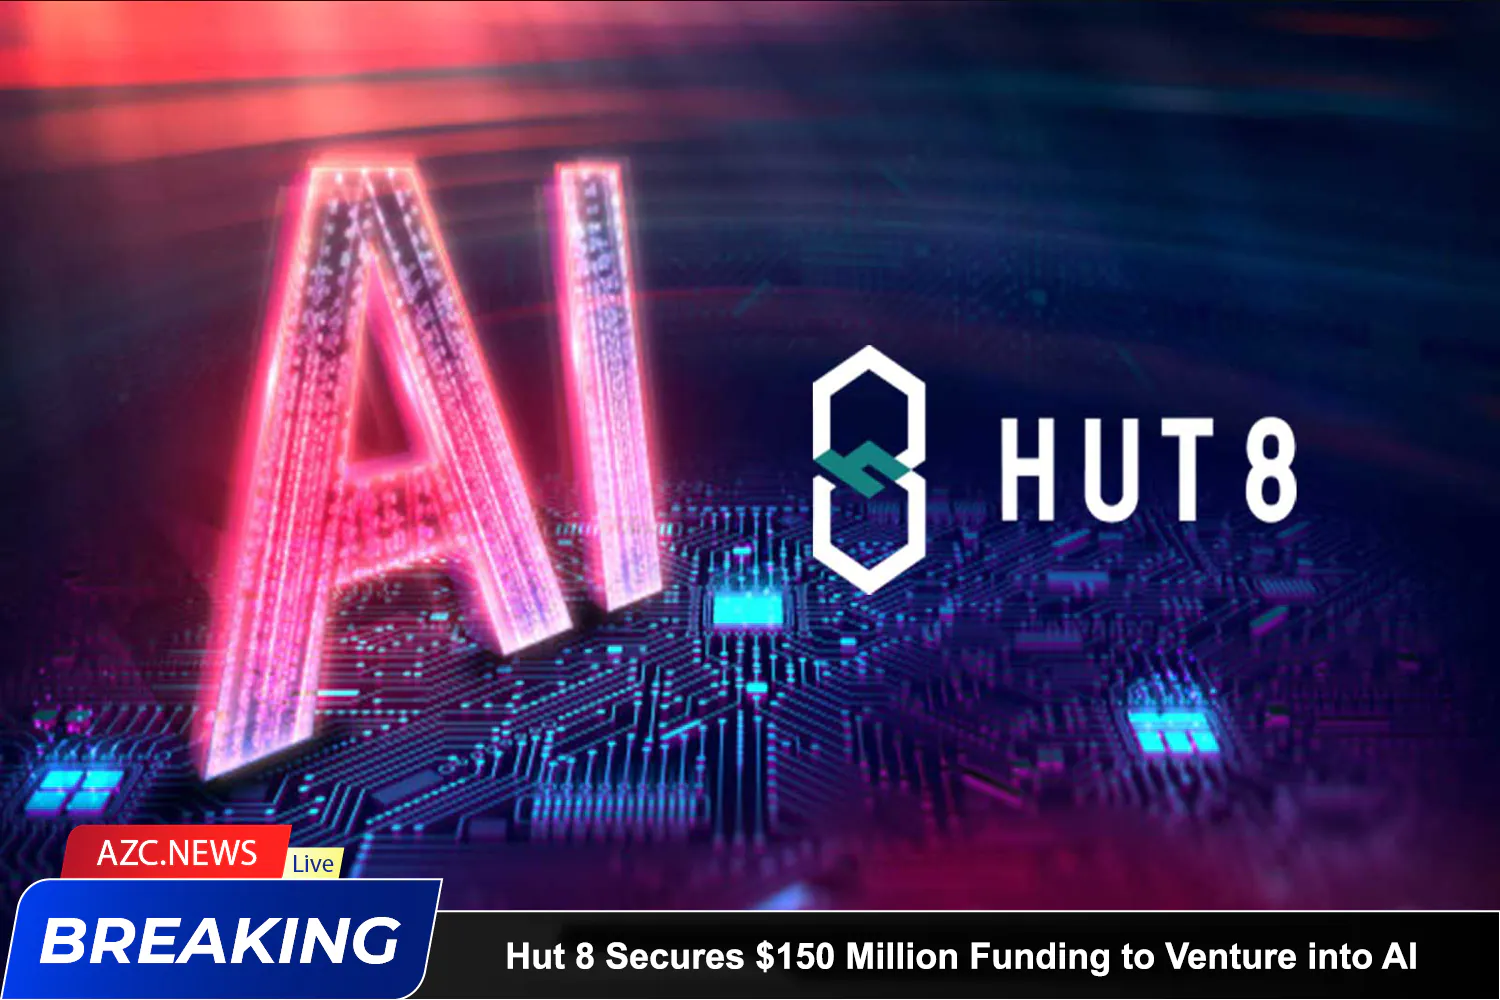 Azcnews Hut 8 Secures $150 Million Funding To Venture Into Ai